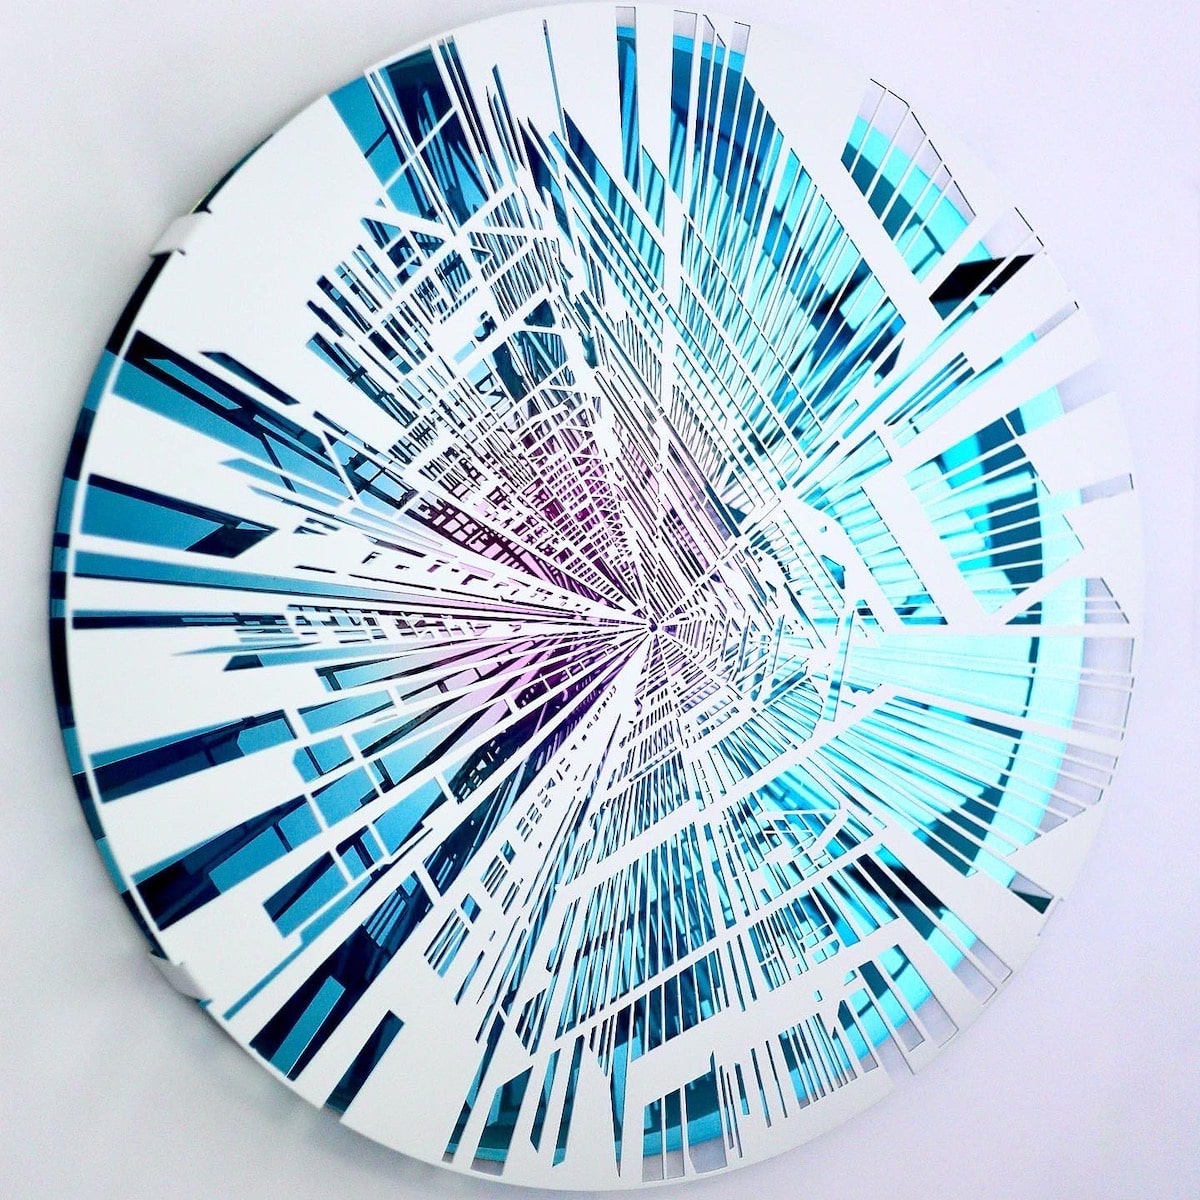 Laser-cut artwork captures the energy of cities